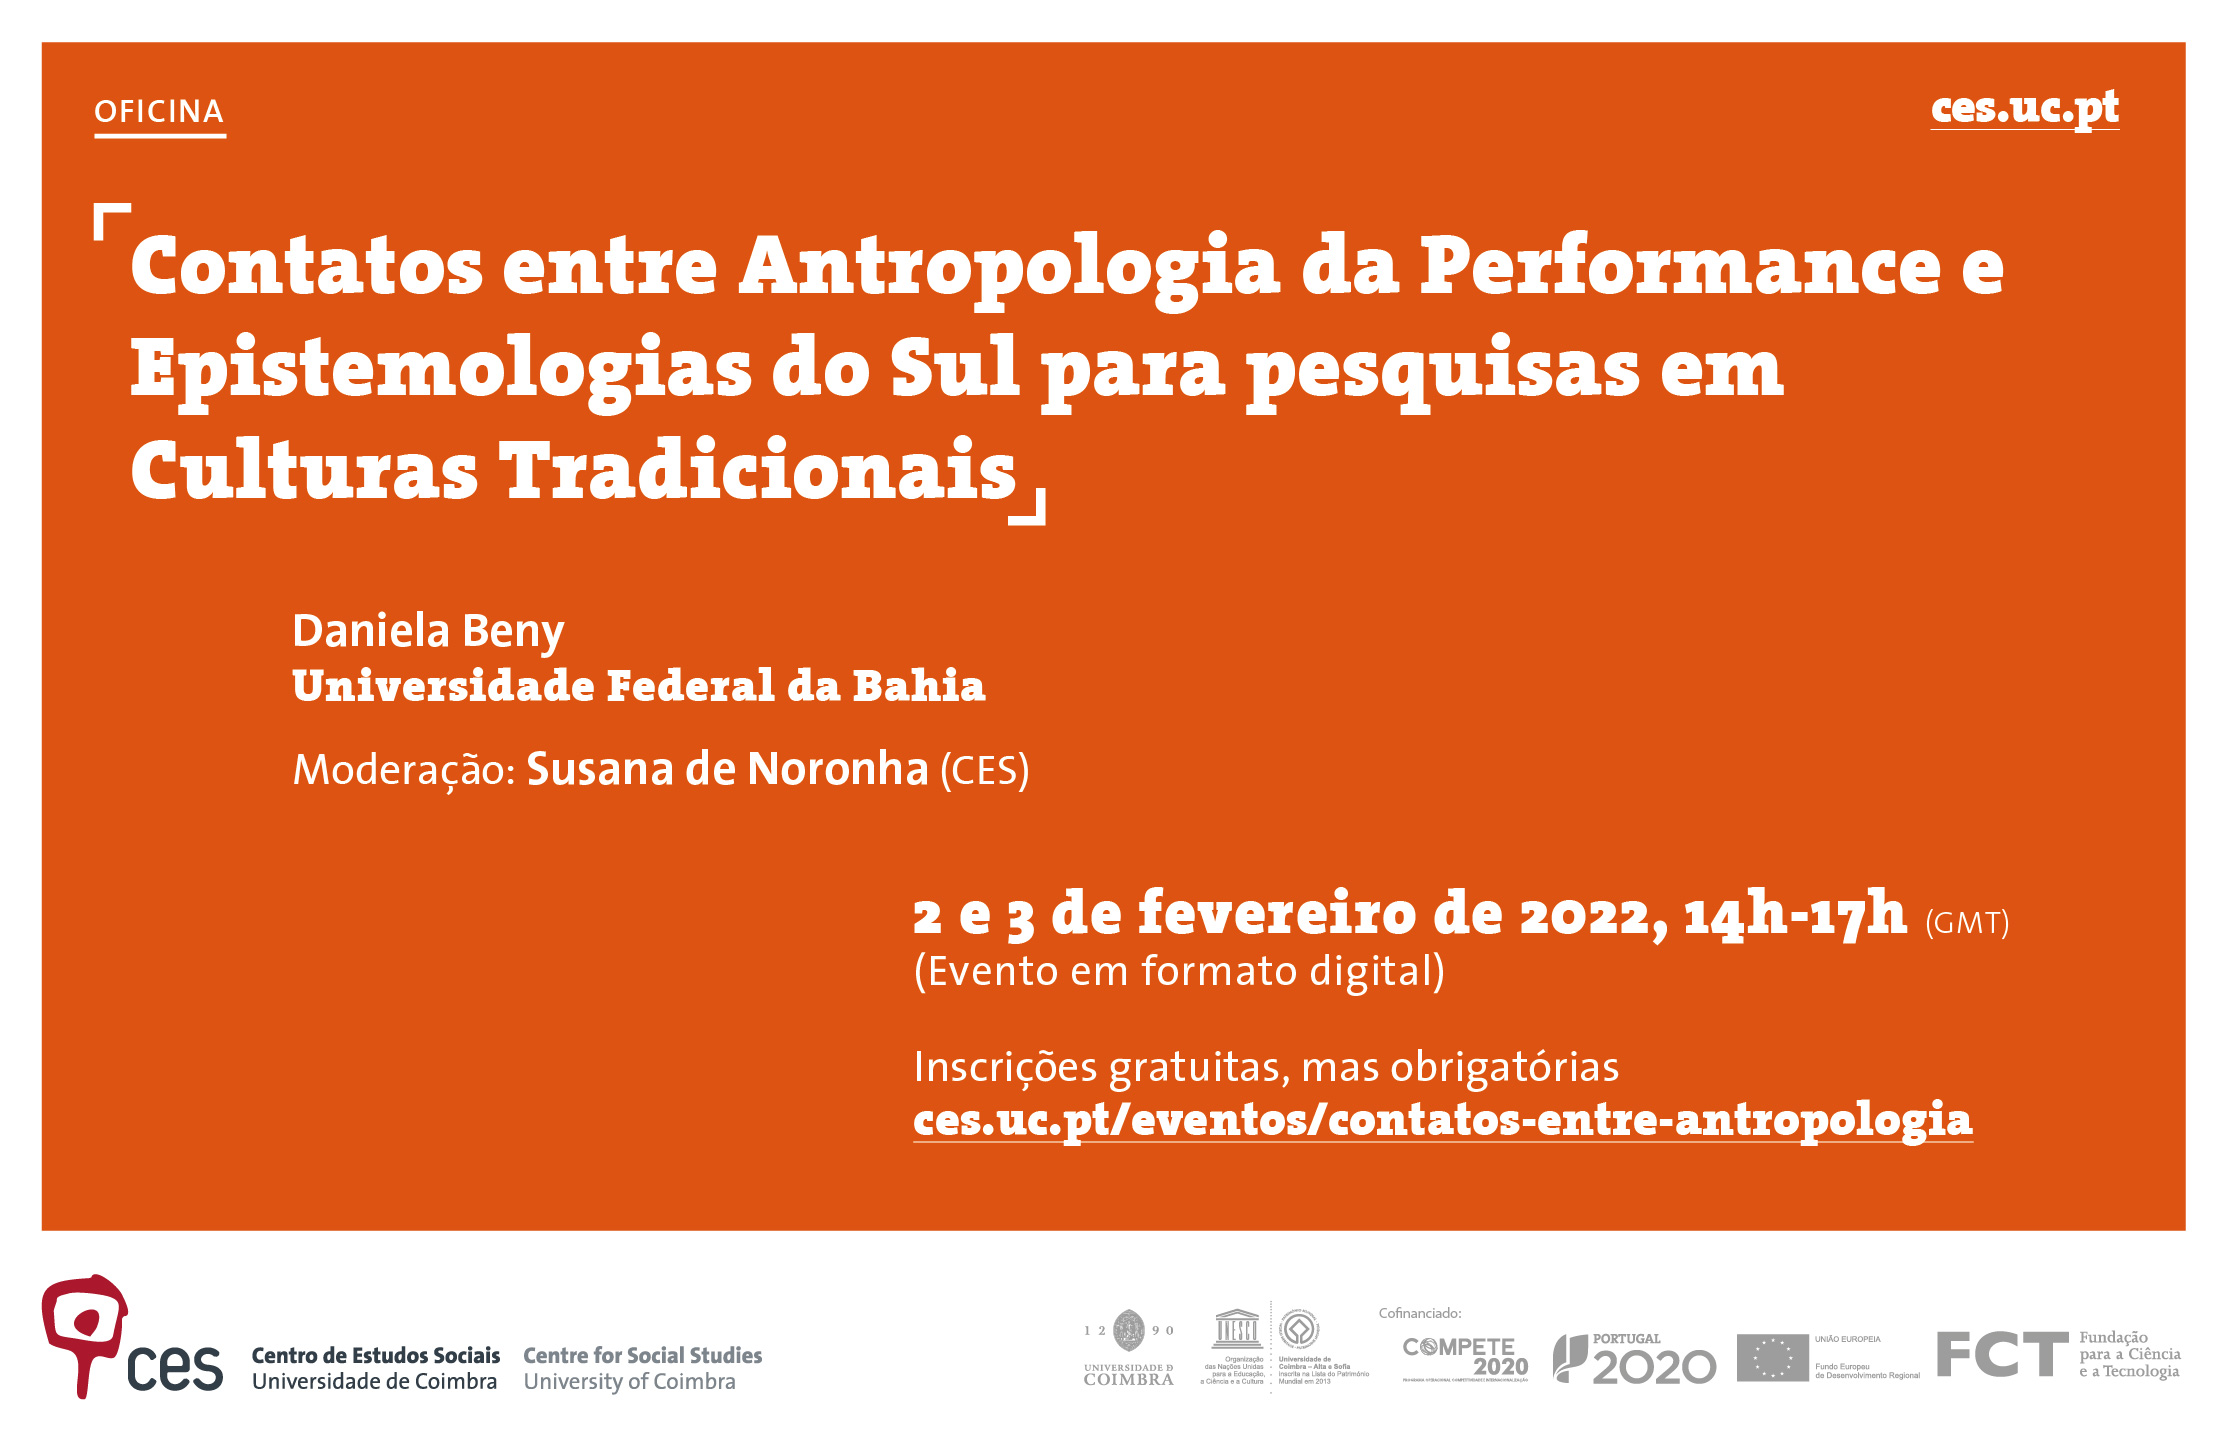 Contacts between Anthropology of Performance and Epistemologies of the South for research in Traditional Cultures <span id="edit_36251"><script>$(function() { $('#edit_36251').load( "/myces/user/editobj.php?tipo=evento&id=36251" ); });</script></span>